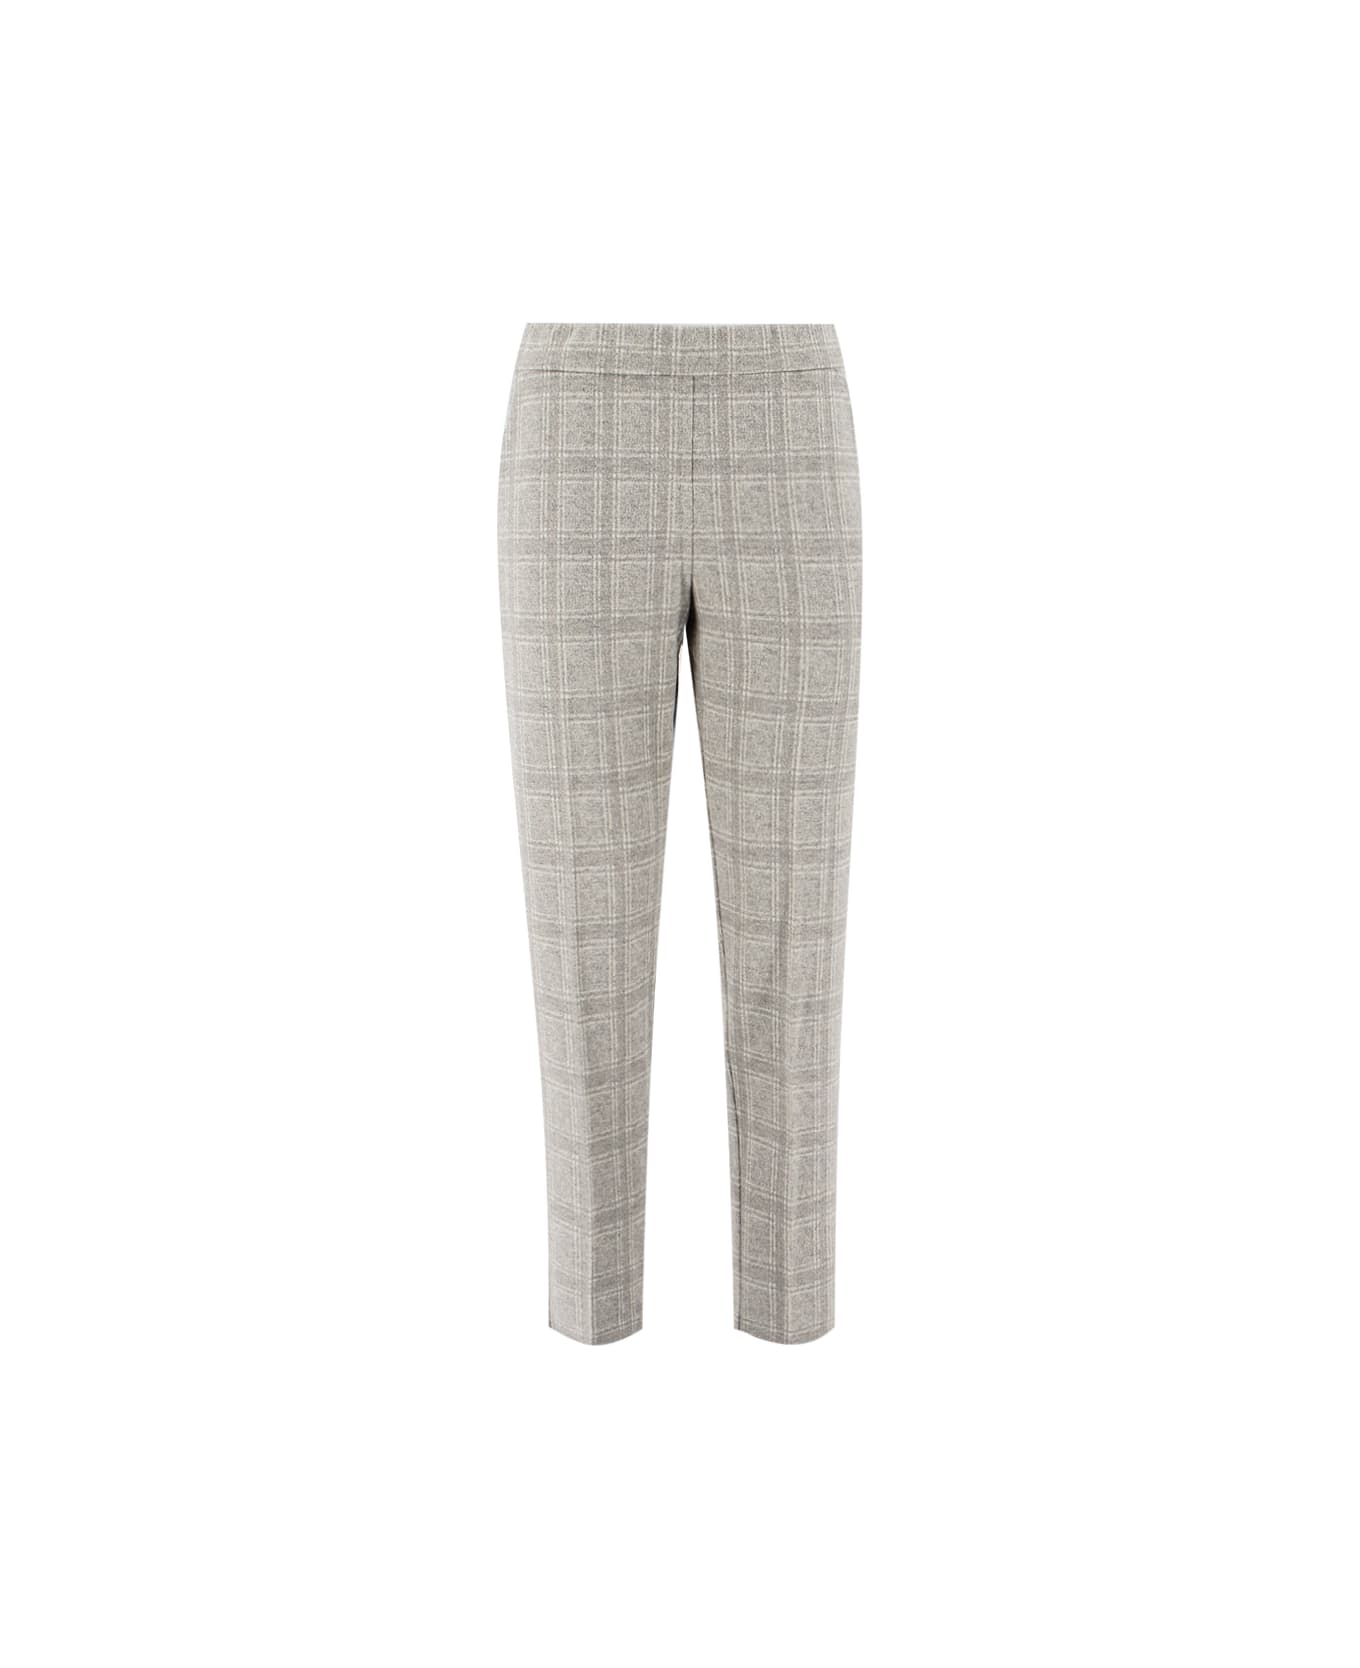 Le Tricot Perugia Trousers - GREY/BEIGE ボトムス